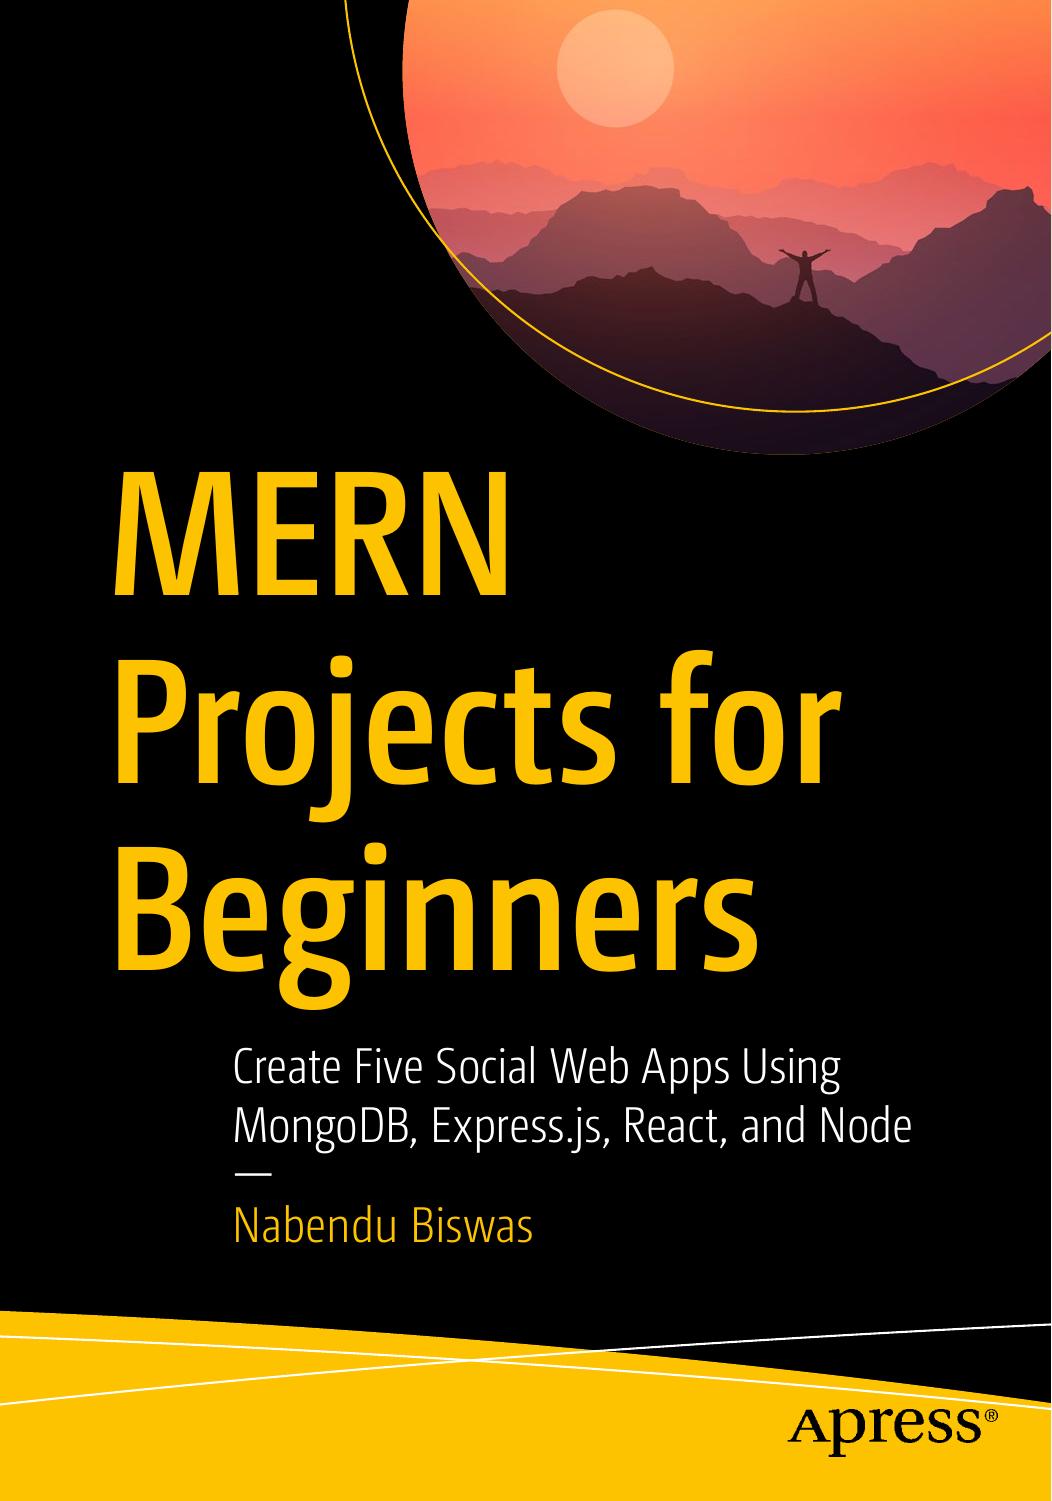 MERN Projects for Beginners: Create Five Social Web Apps using MongoDB, Express.js, React, and Node